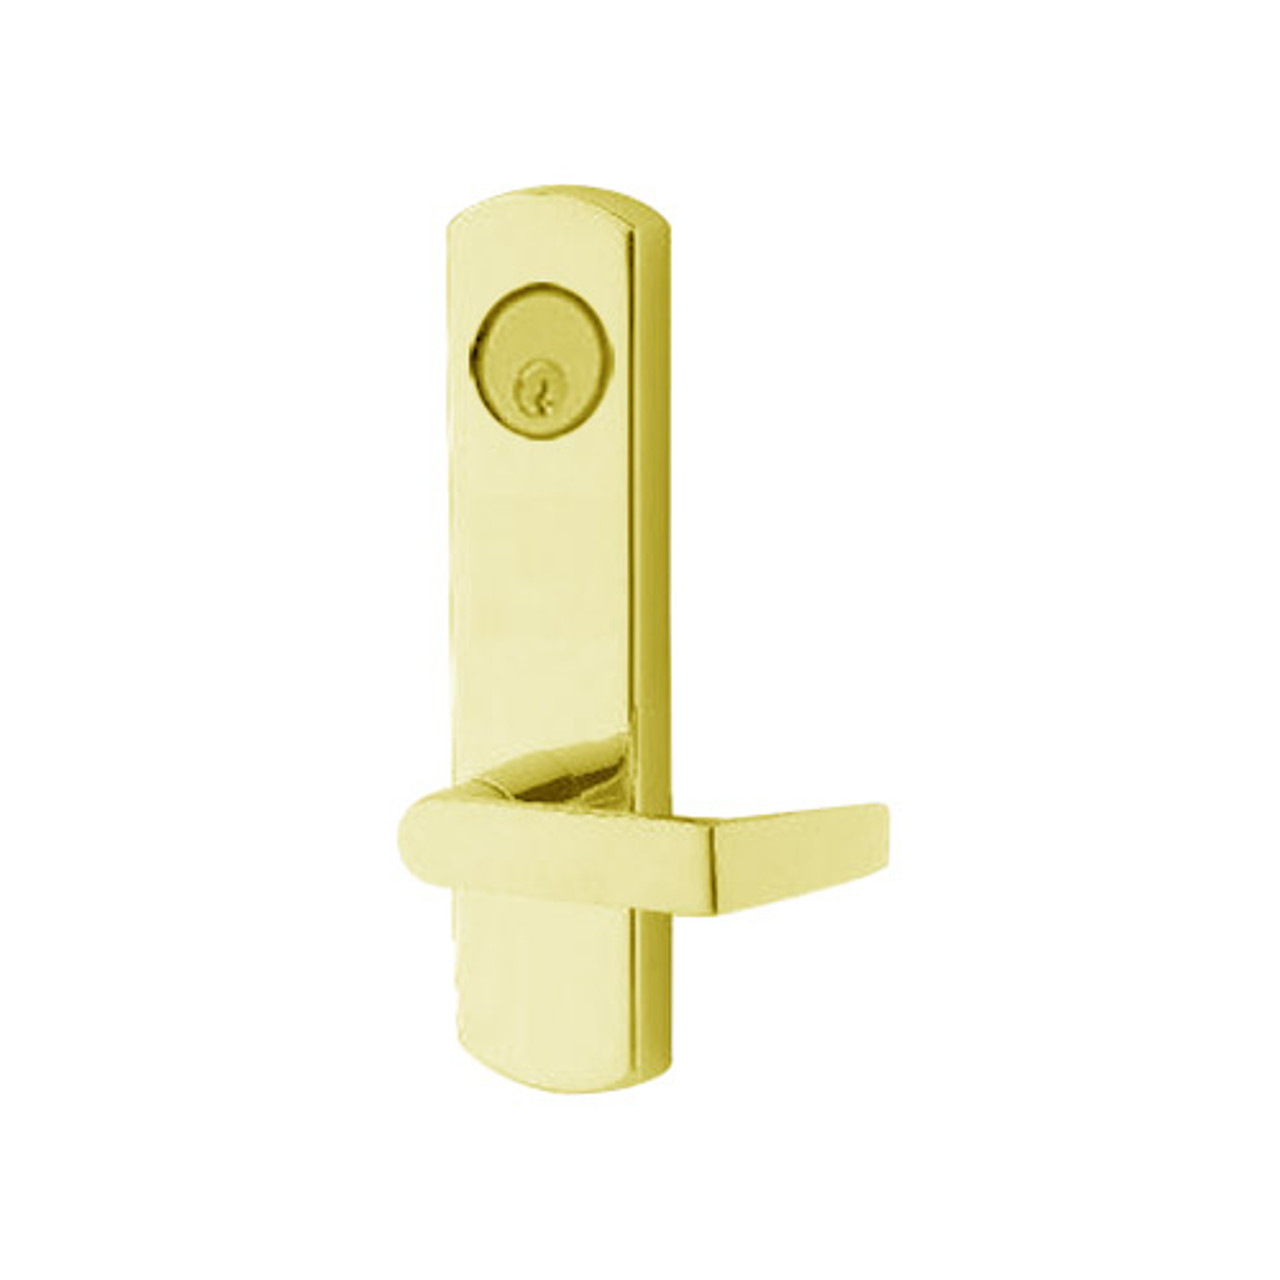 3080E-03-0-94-30 US3 Adams Rite Electrified Entry Trim with Square Lever in Bright Brass Finish